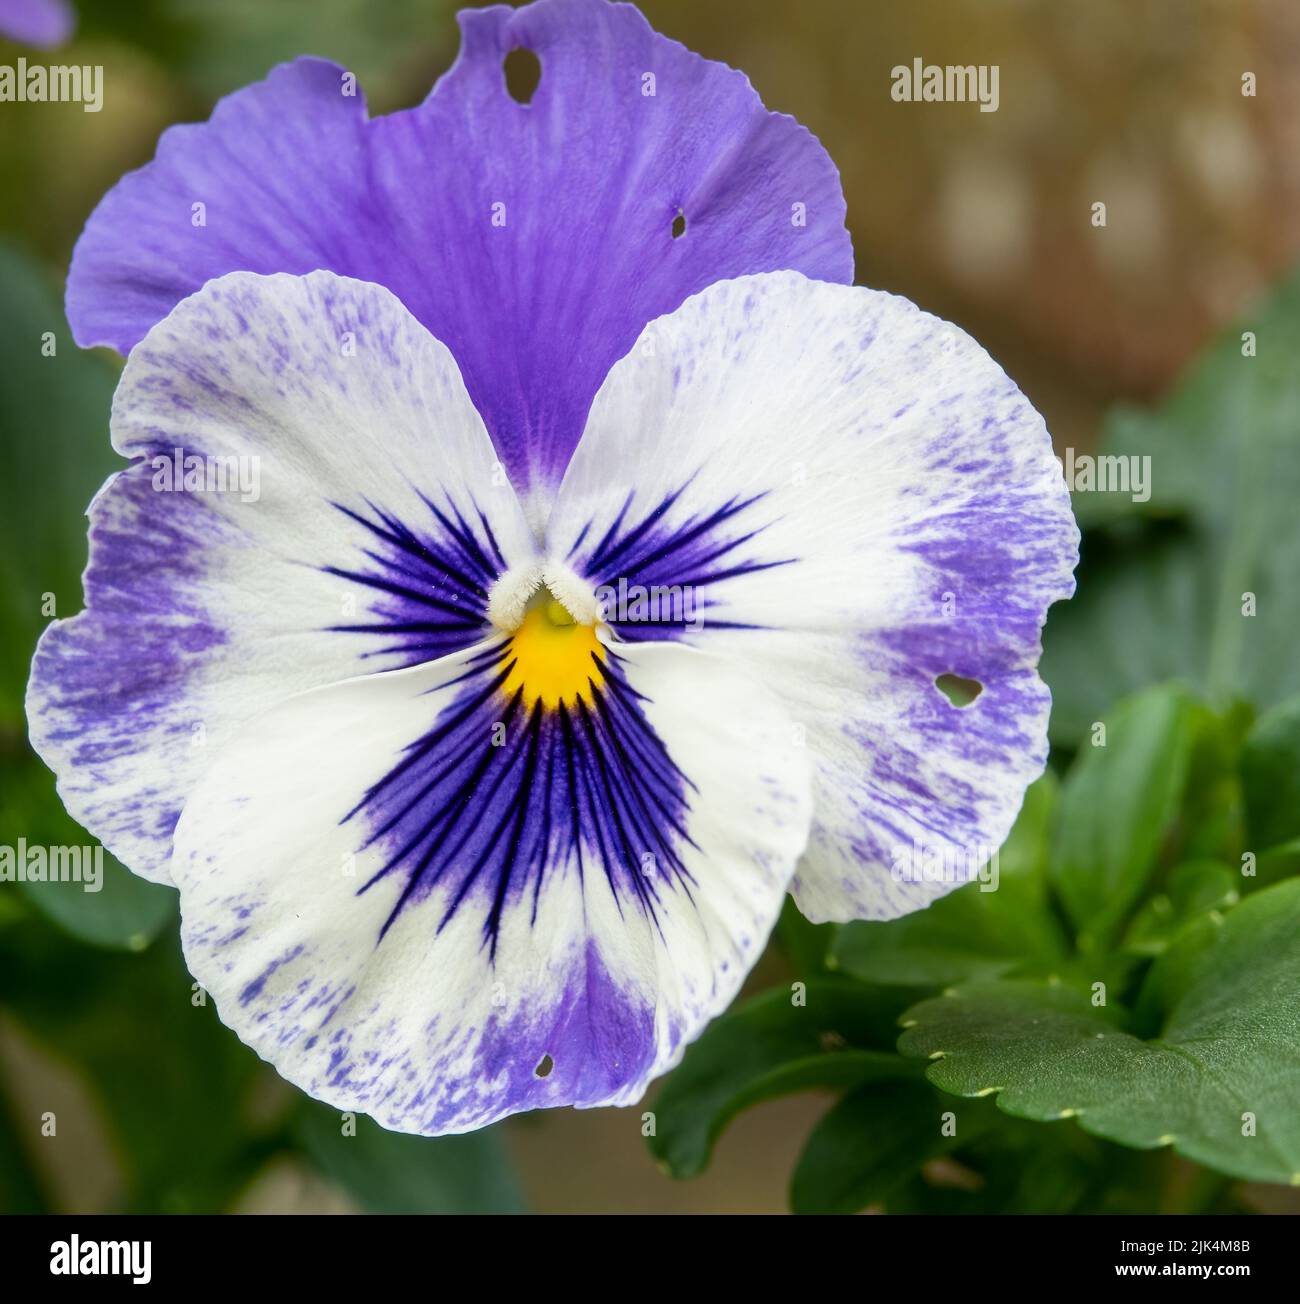 close up of beautiful summer flowering blue and white Pansies (Viola tricolor var. hortensis) Stock Photo